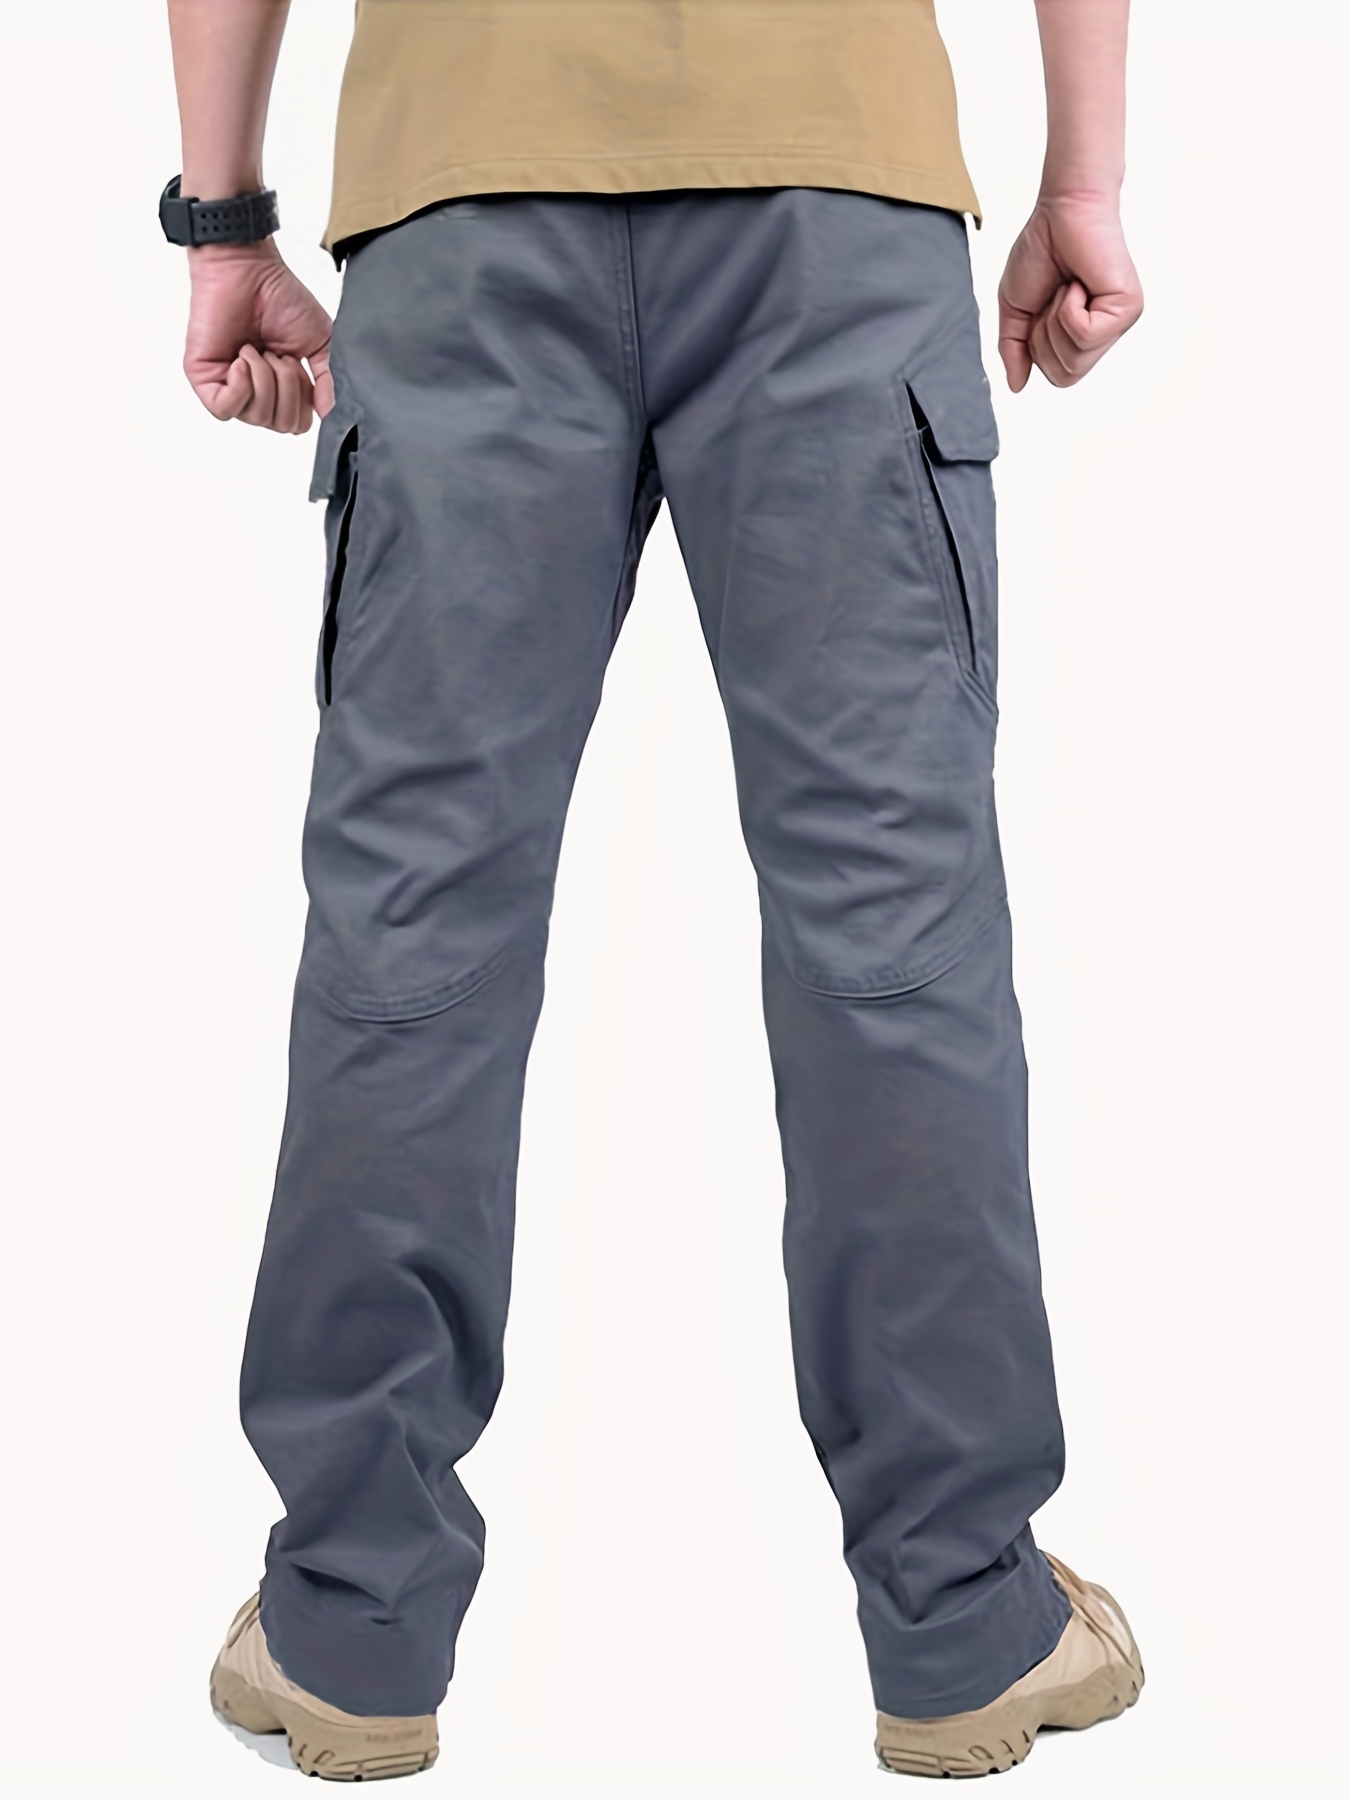 Outdoor Hiking Waterproof Pants Men Spring Autumn Stretch Tactical